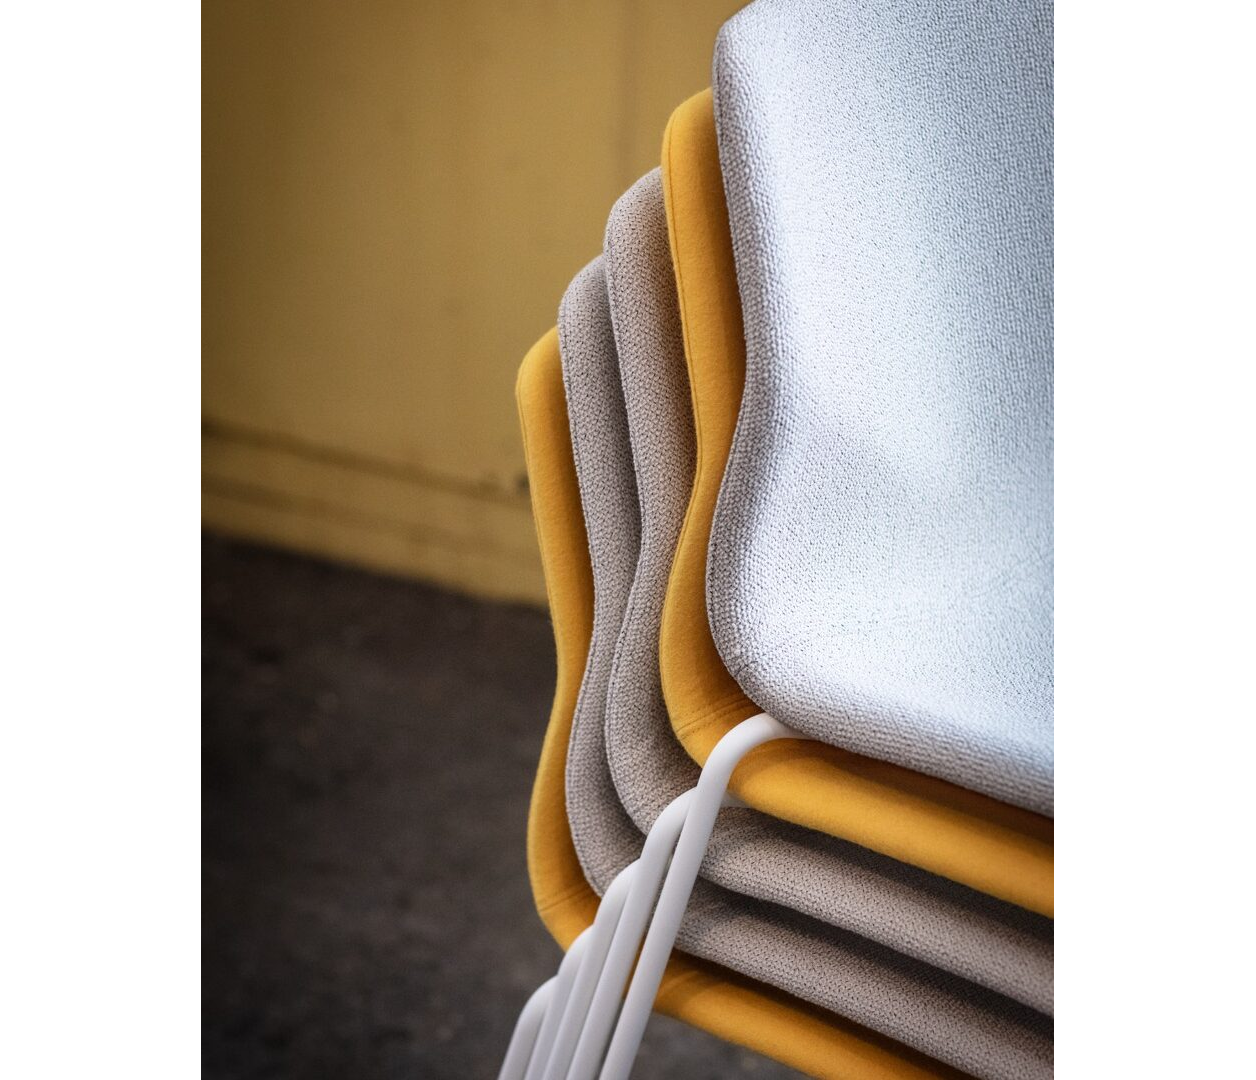 OCEE&FOUR – Chairs – FourSure 77 – Details Image 5 Large